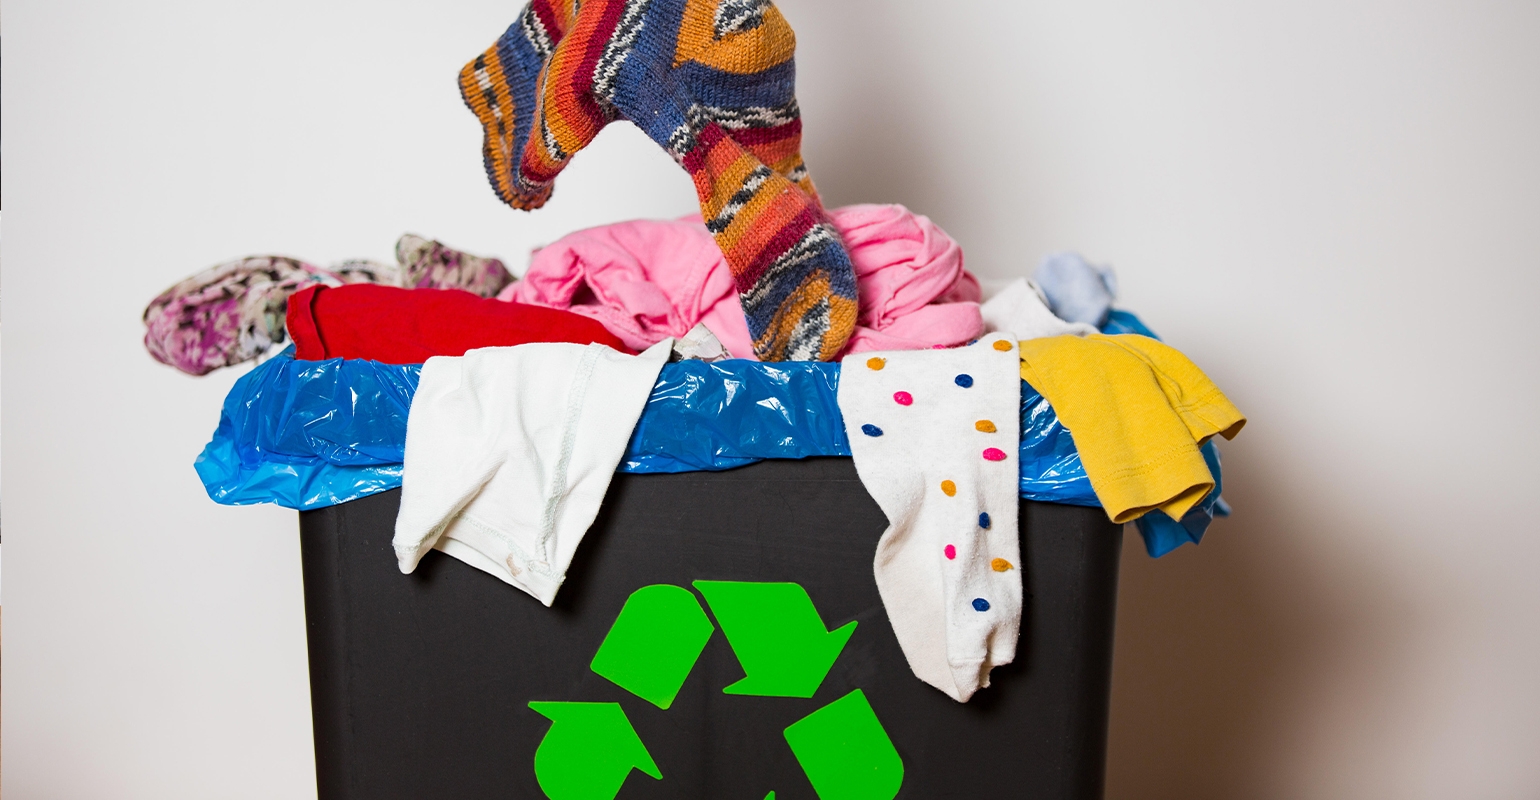 Marine Layer Teams with Trashie to Scale Clothing Recycling